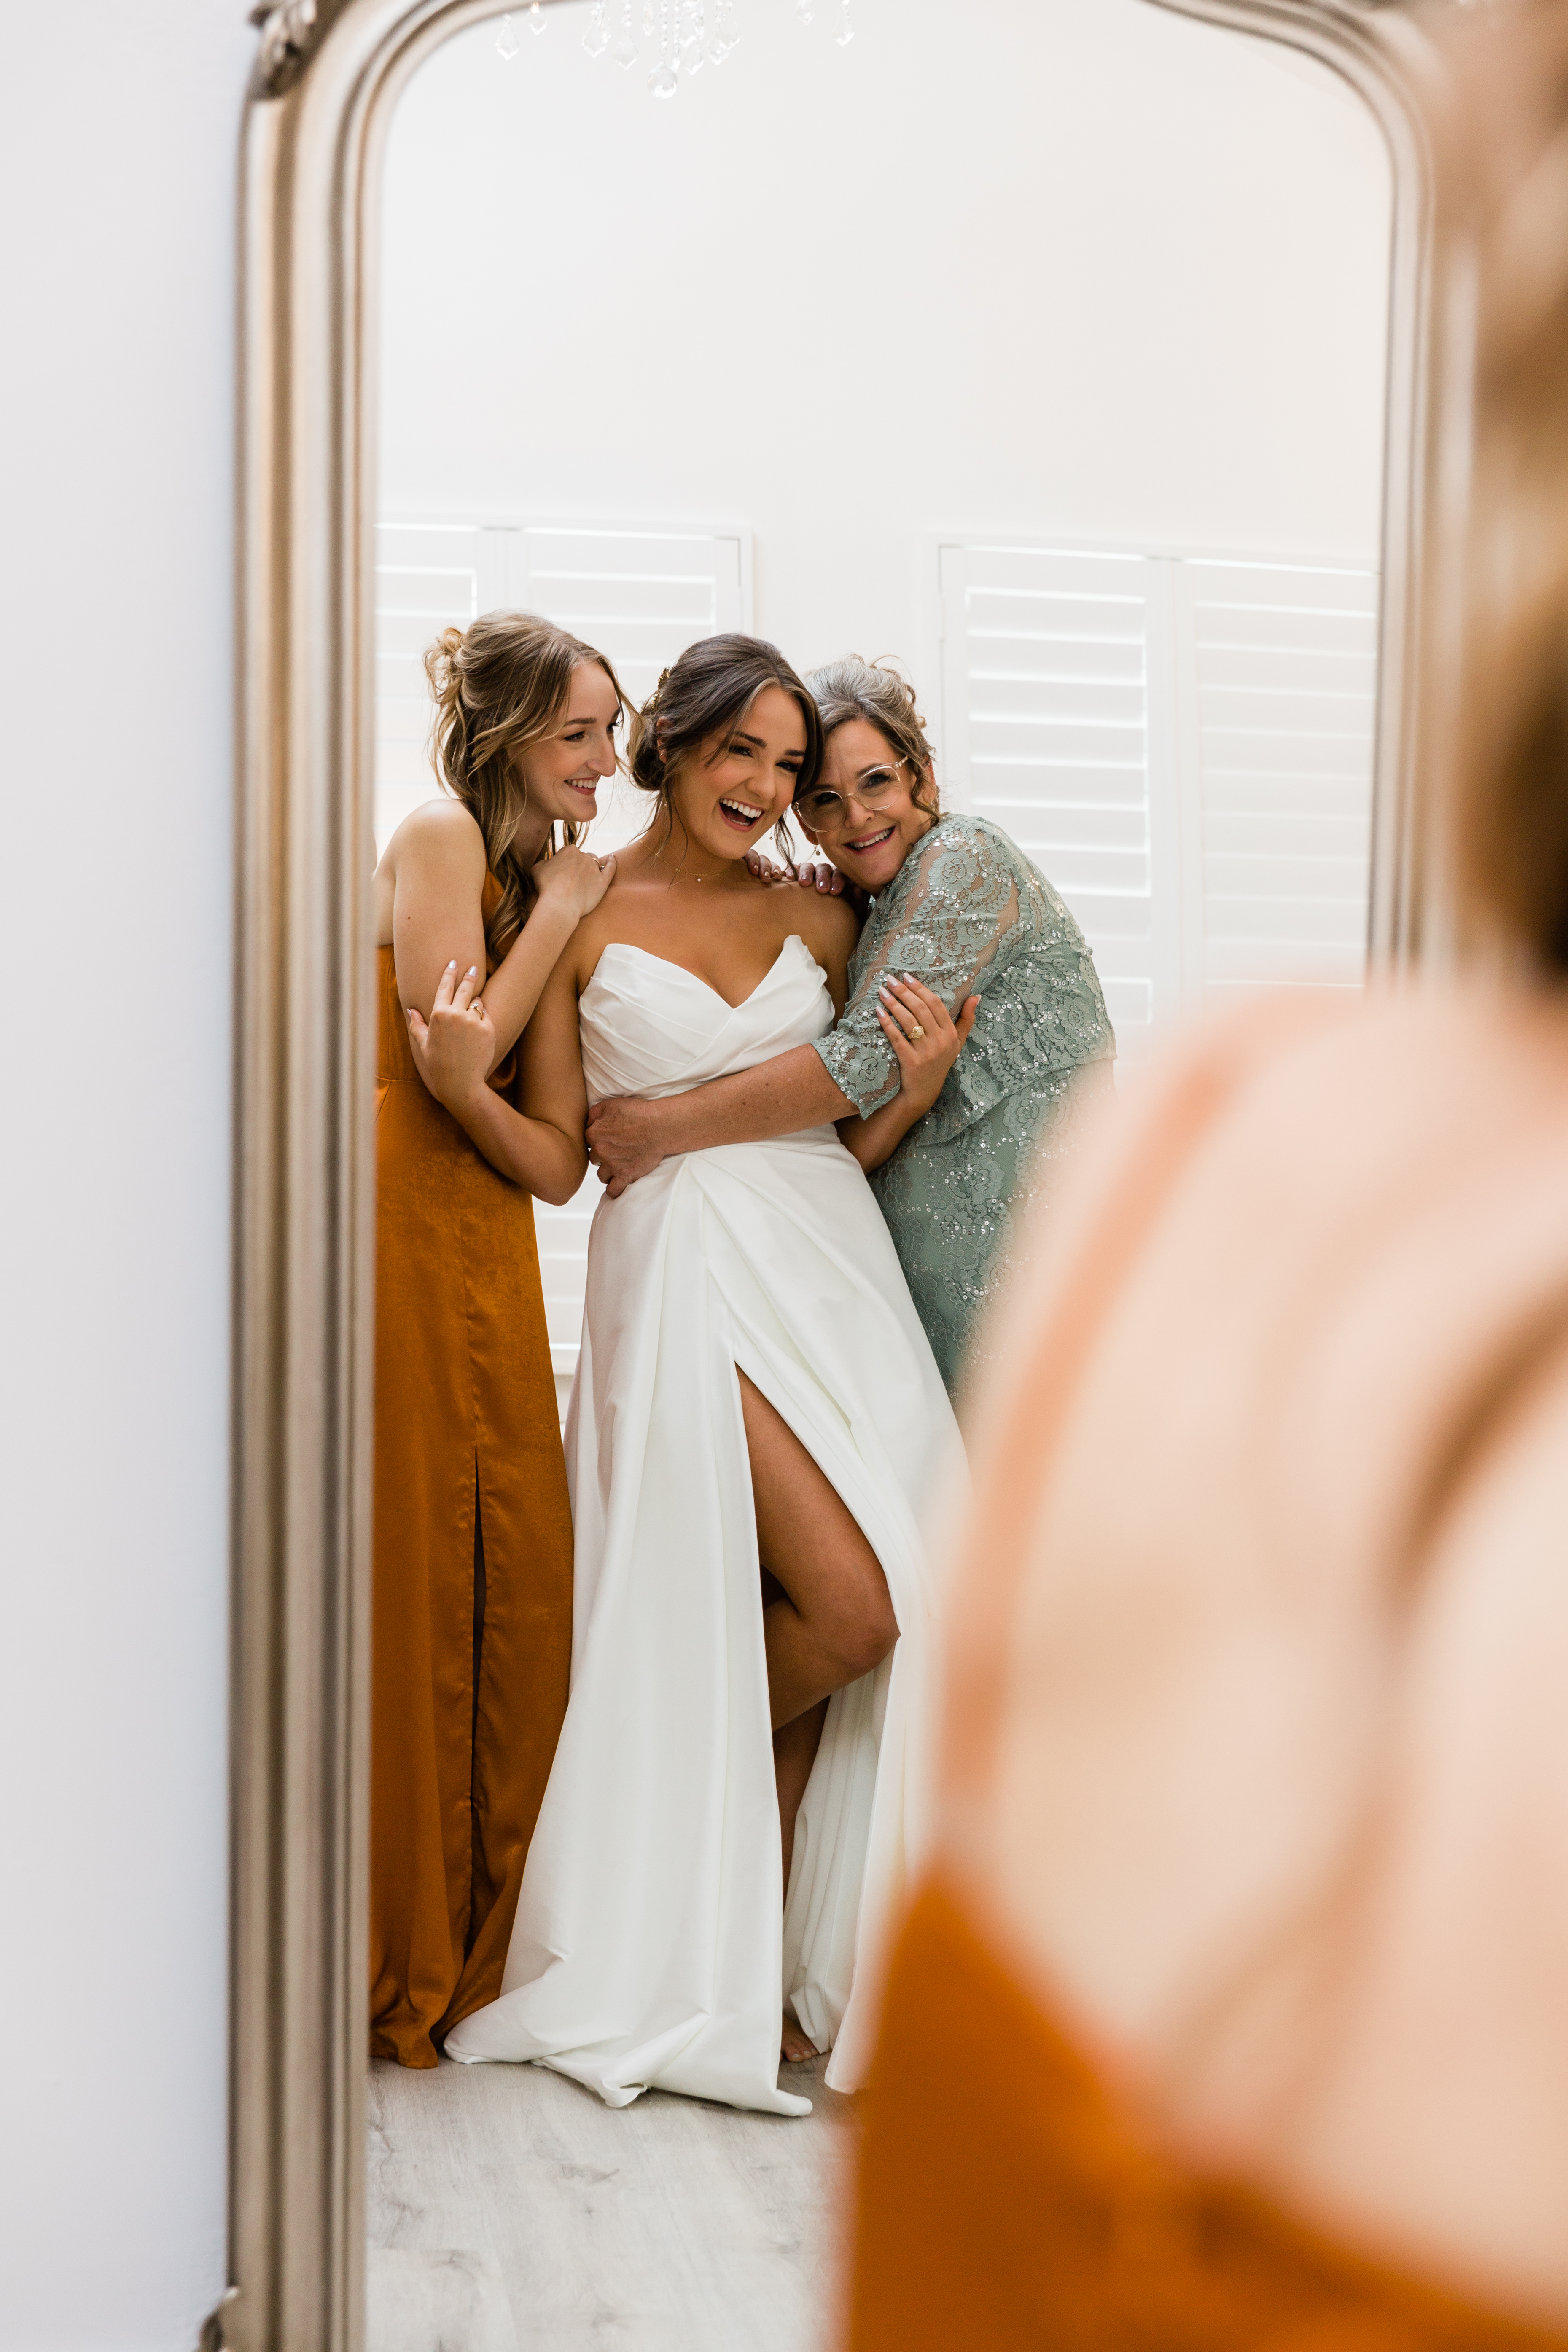 A group of bridesmaids admiring the bride's wedding dress in anticipation of the ceremony.